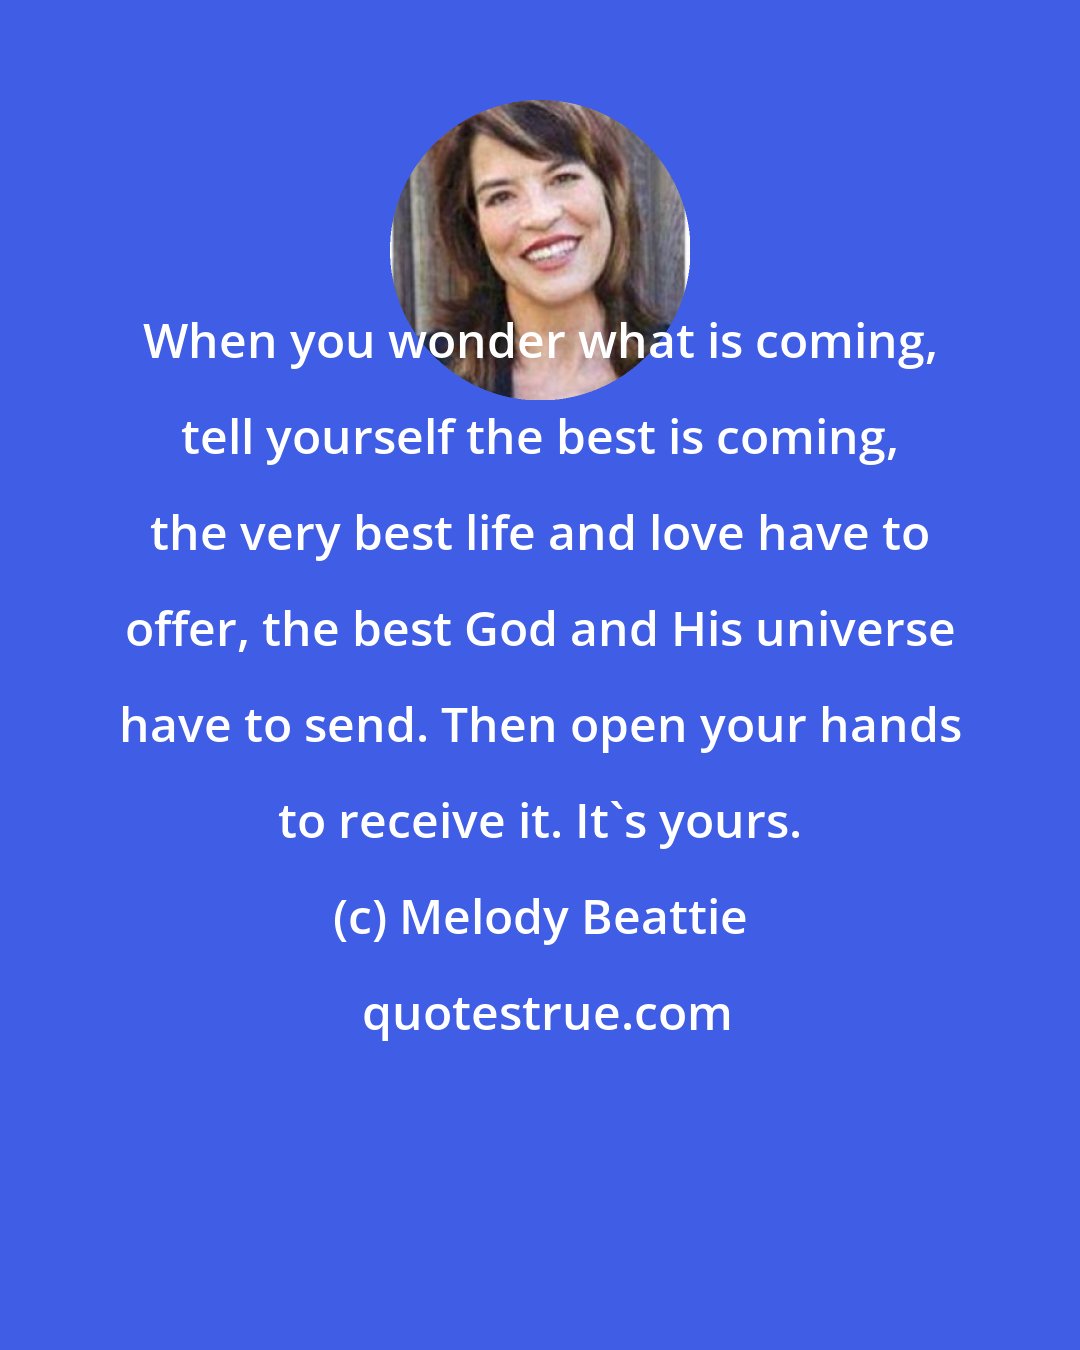 Melody Beattie: When you wonder what is coming, tell yourself the best is coming, the very best life and love have to offer, the best God and His universe have to send. Then open your hands to receive it. It's yours.